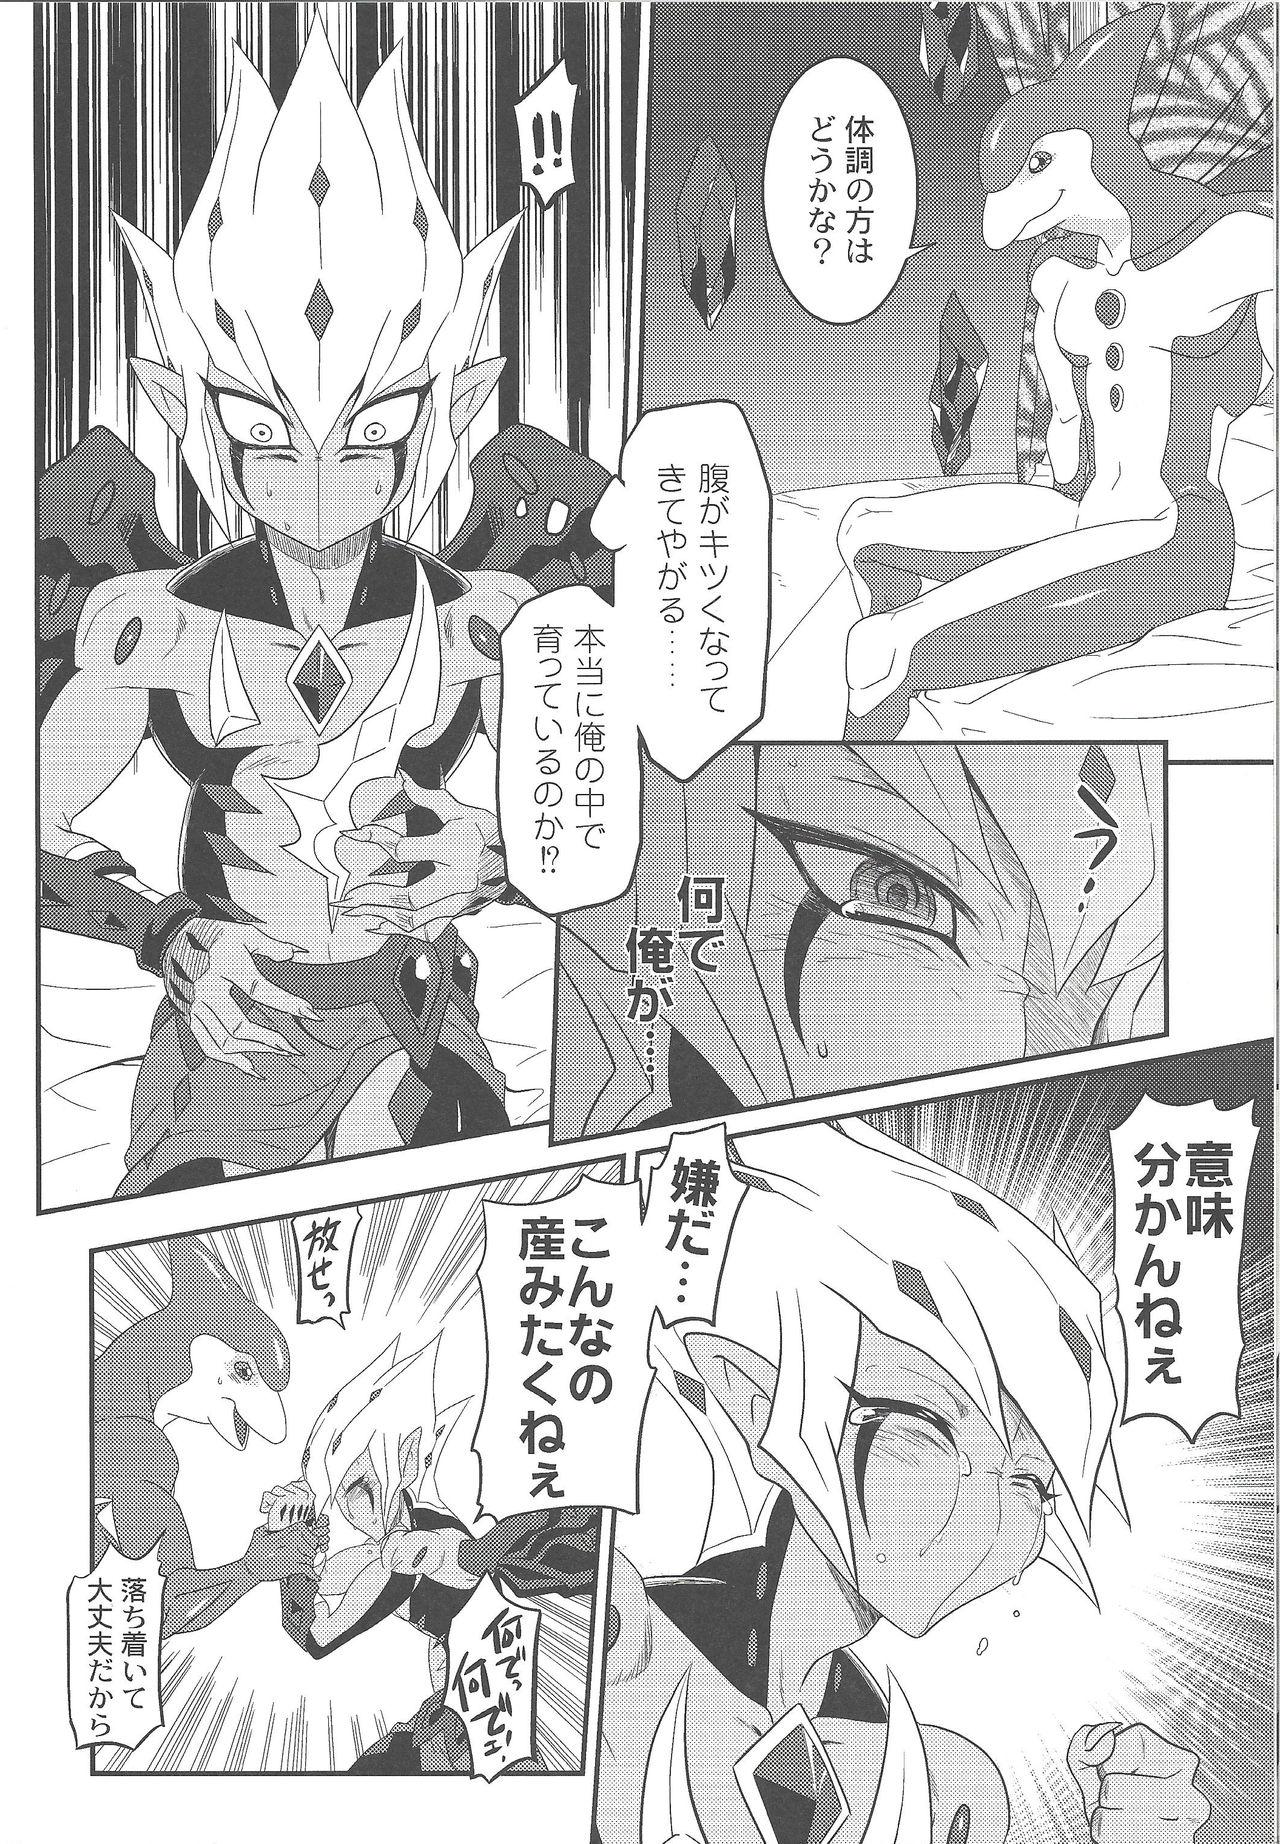 Whores MATERNITY BLUES - Yu-gi-oh zexal Slapping - Page 7